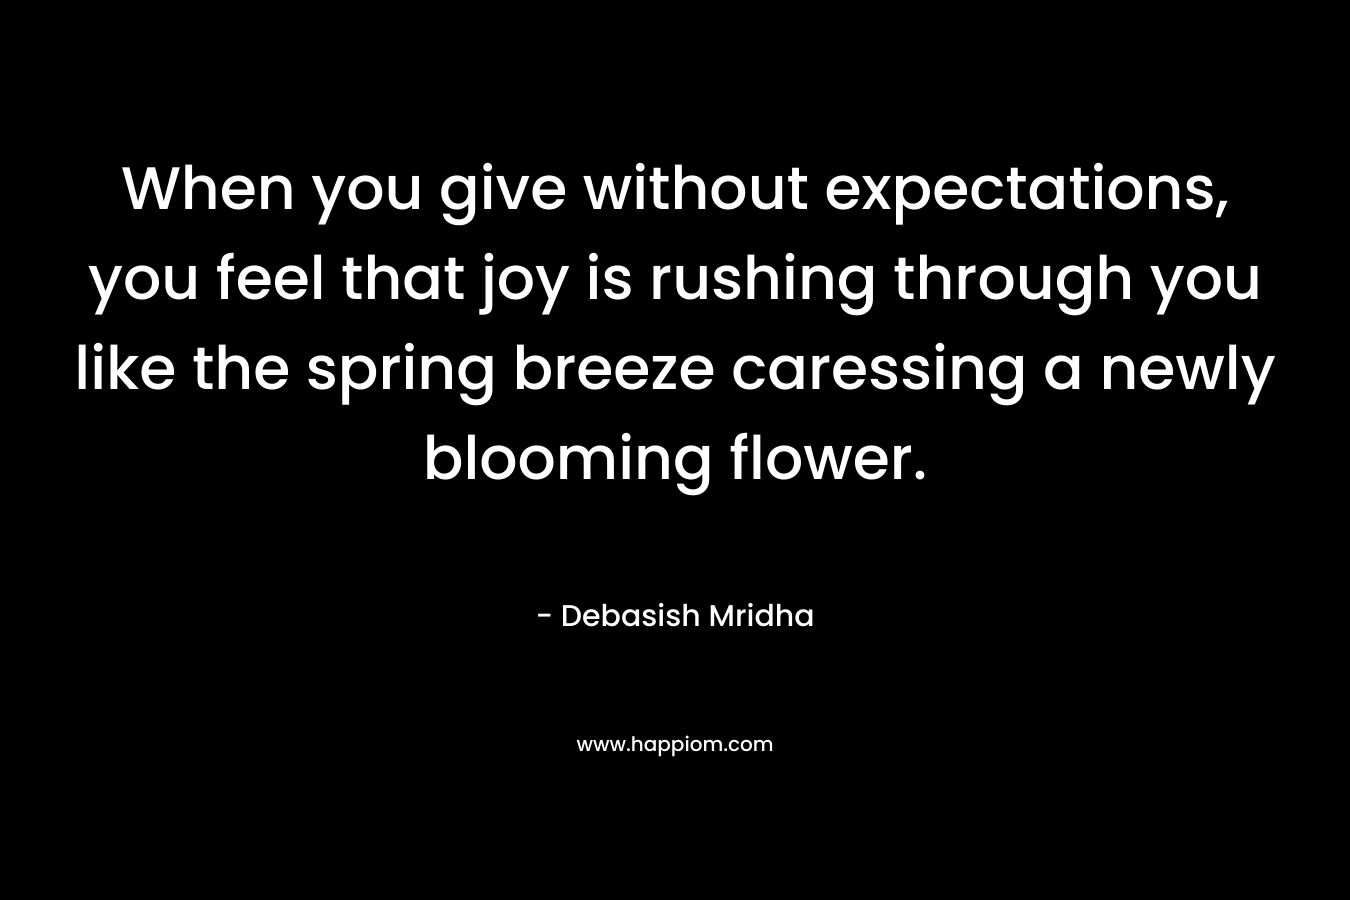 When you give without expectations, you feel that joy is rushing through you like the spring breeze caressing a newly blooming flower. – Debasish Mridha